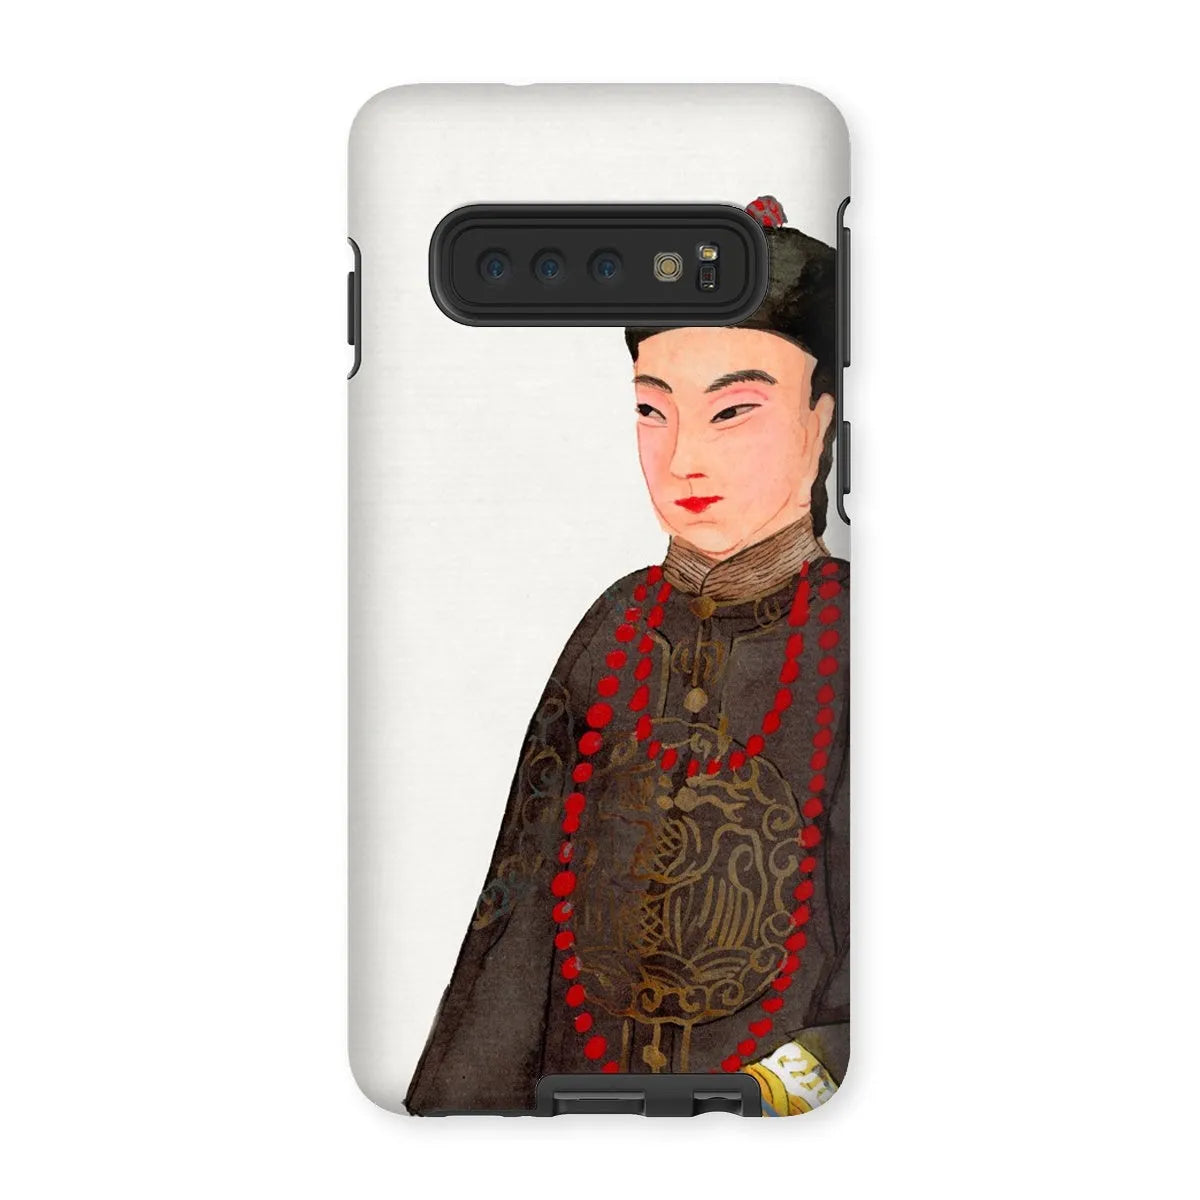 Emperor’s Courtier - Chinese Manchu Aesthetic Art Phone Case - Samsung Galaxy S10 / Matte - Mobile Phone Cases